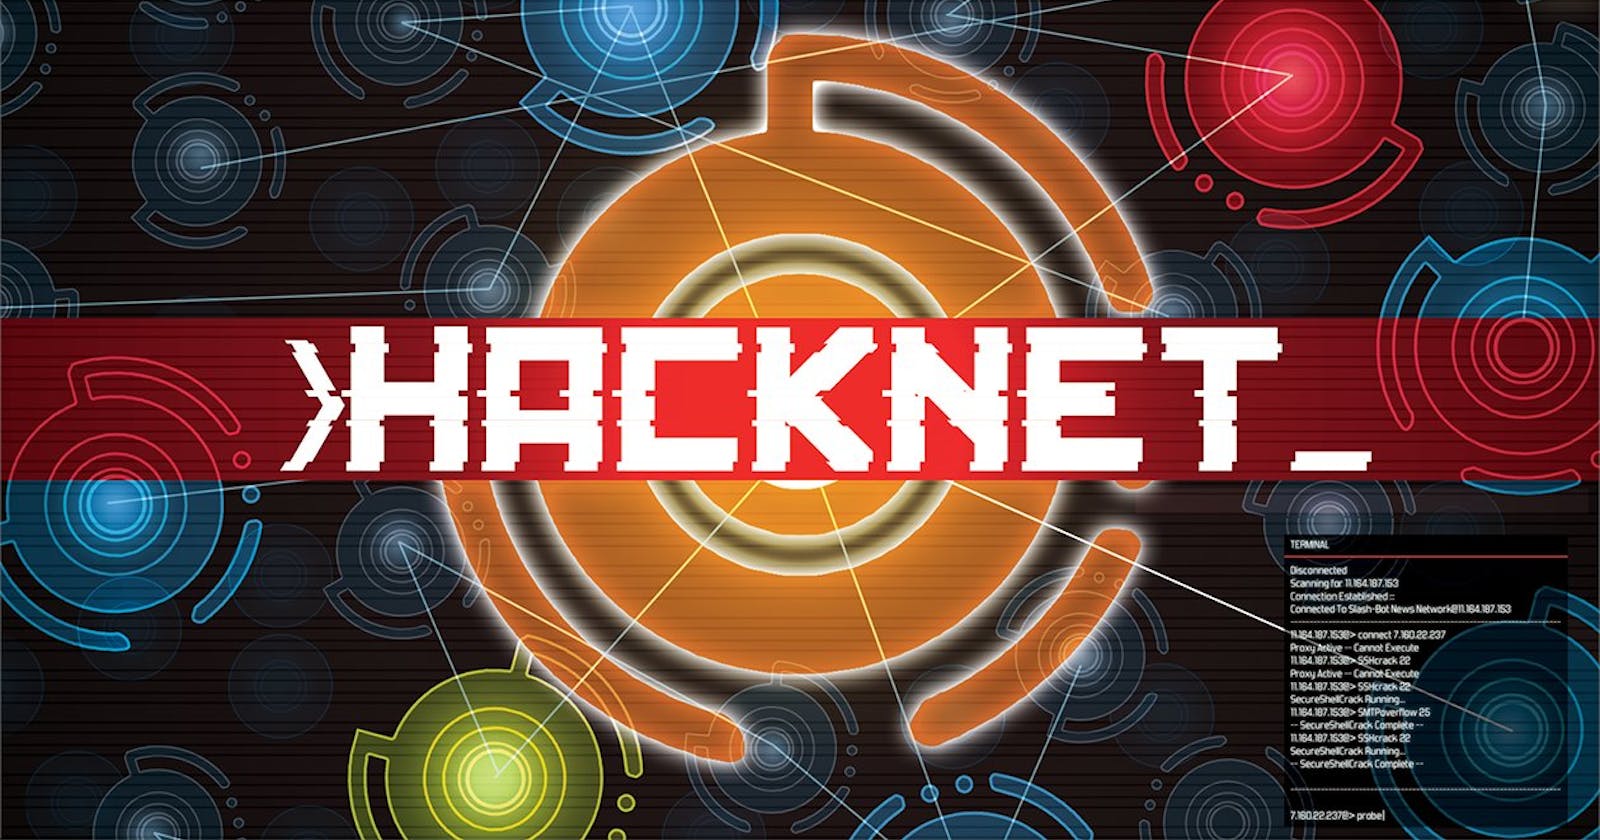 [ Learn While Playing Games ] - Hacknet Walkthrough Part 1